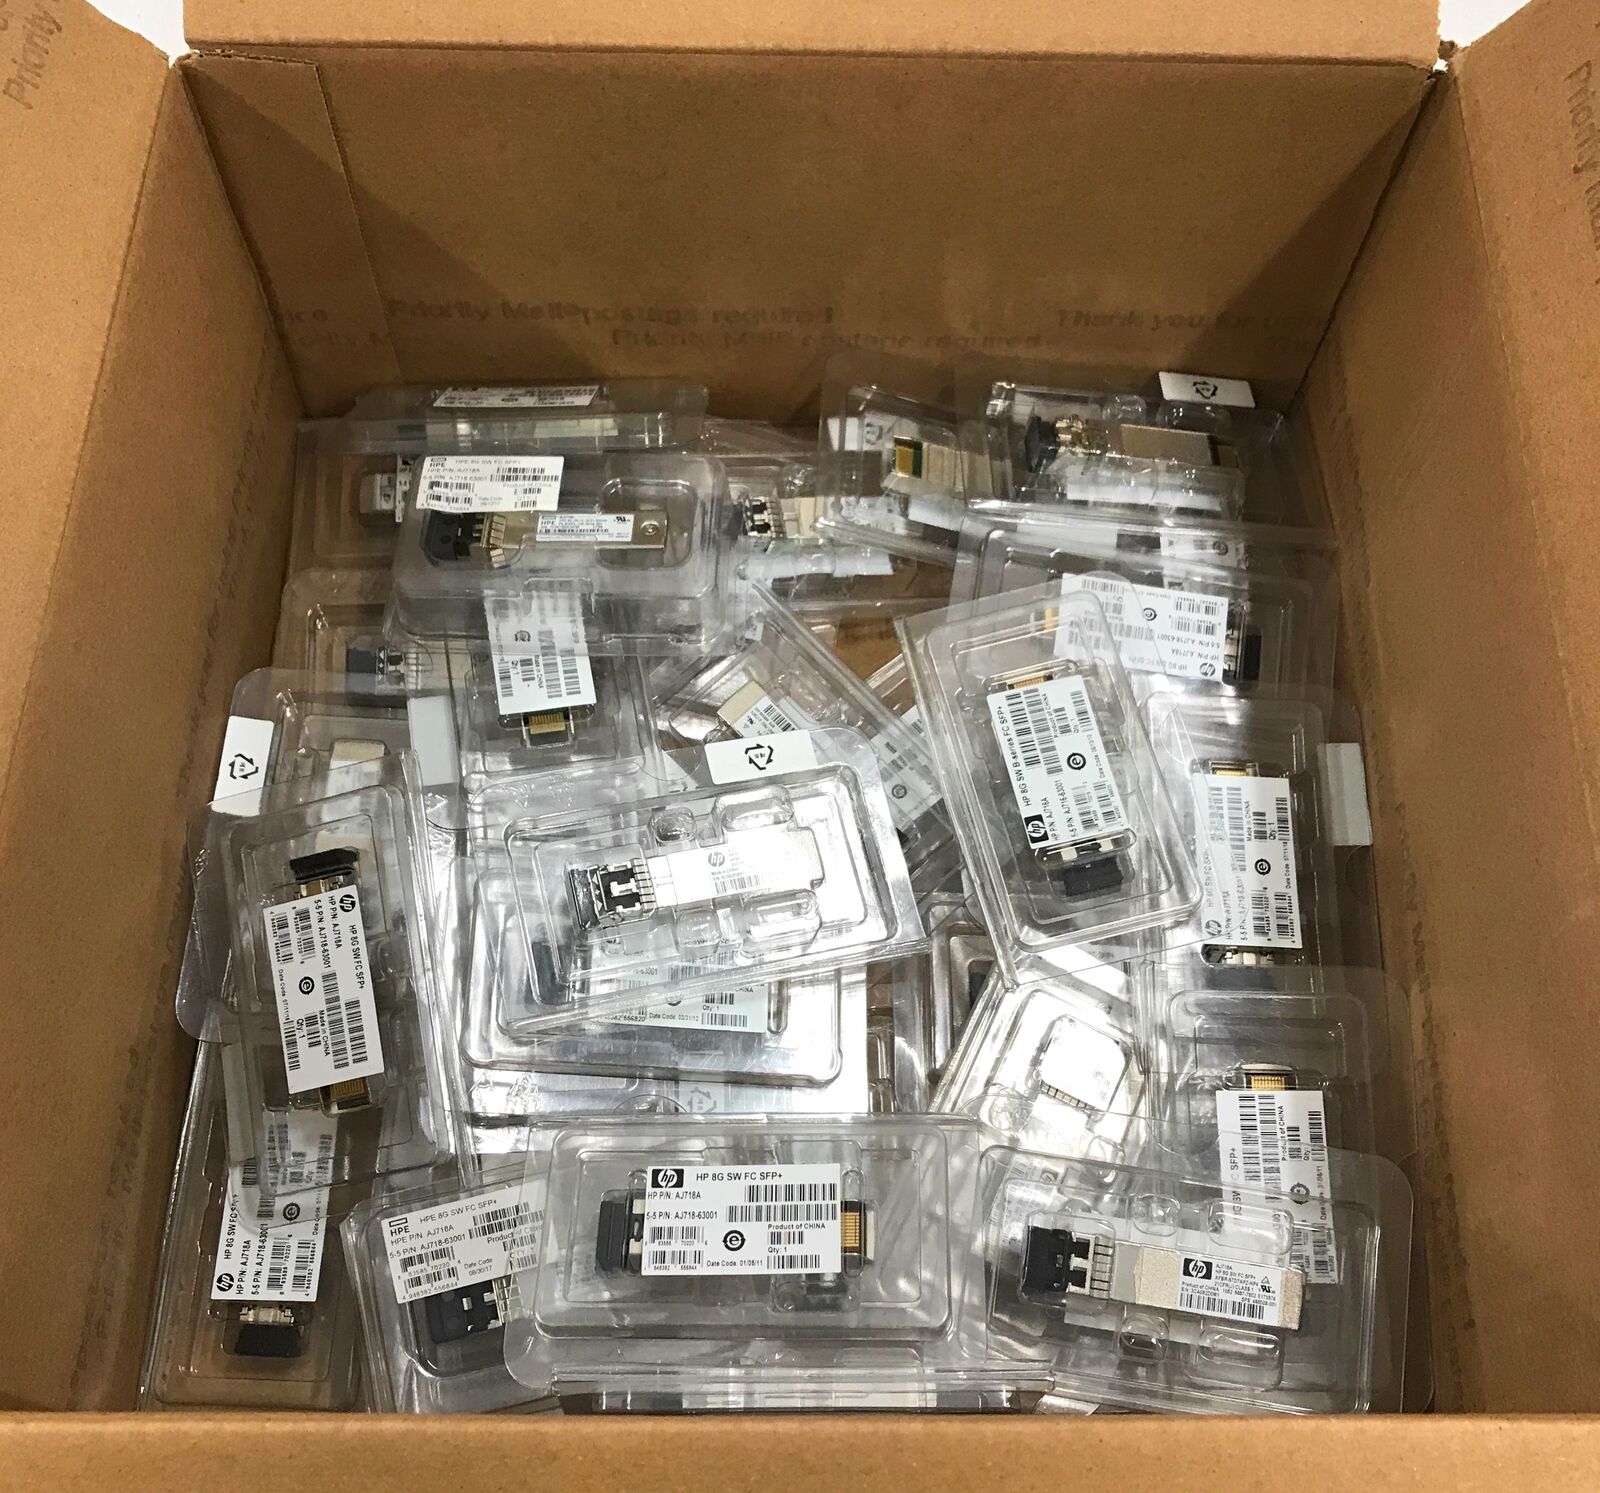 Lot of 37 NEW HP StorageWorks AJ718A 8GB Short Wave FC SFP+ Transceiver Modules